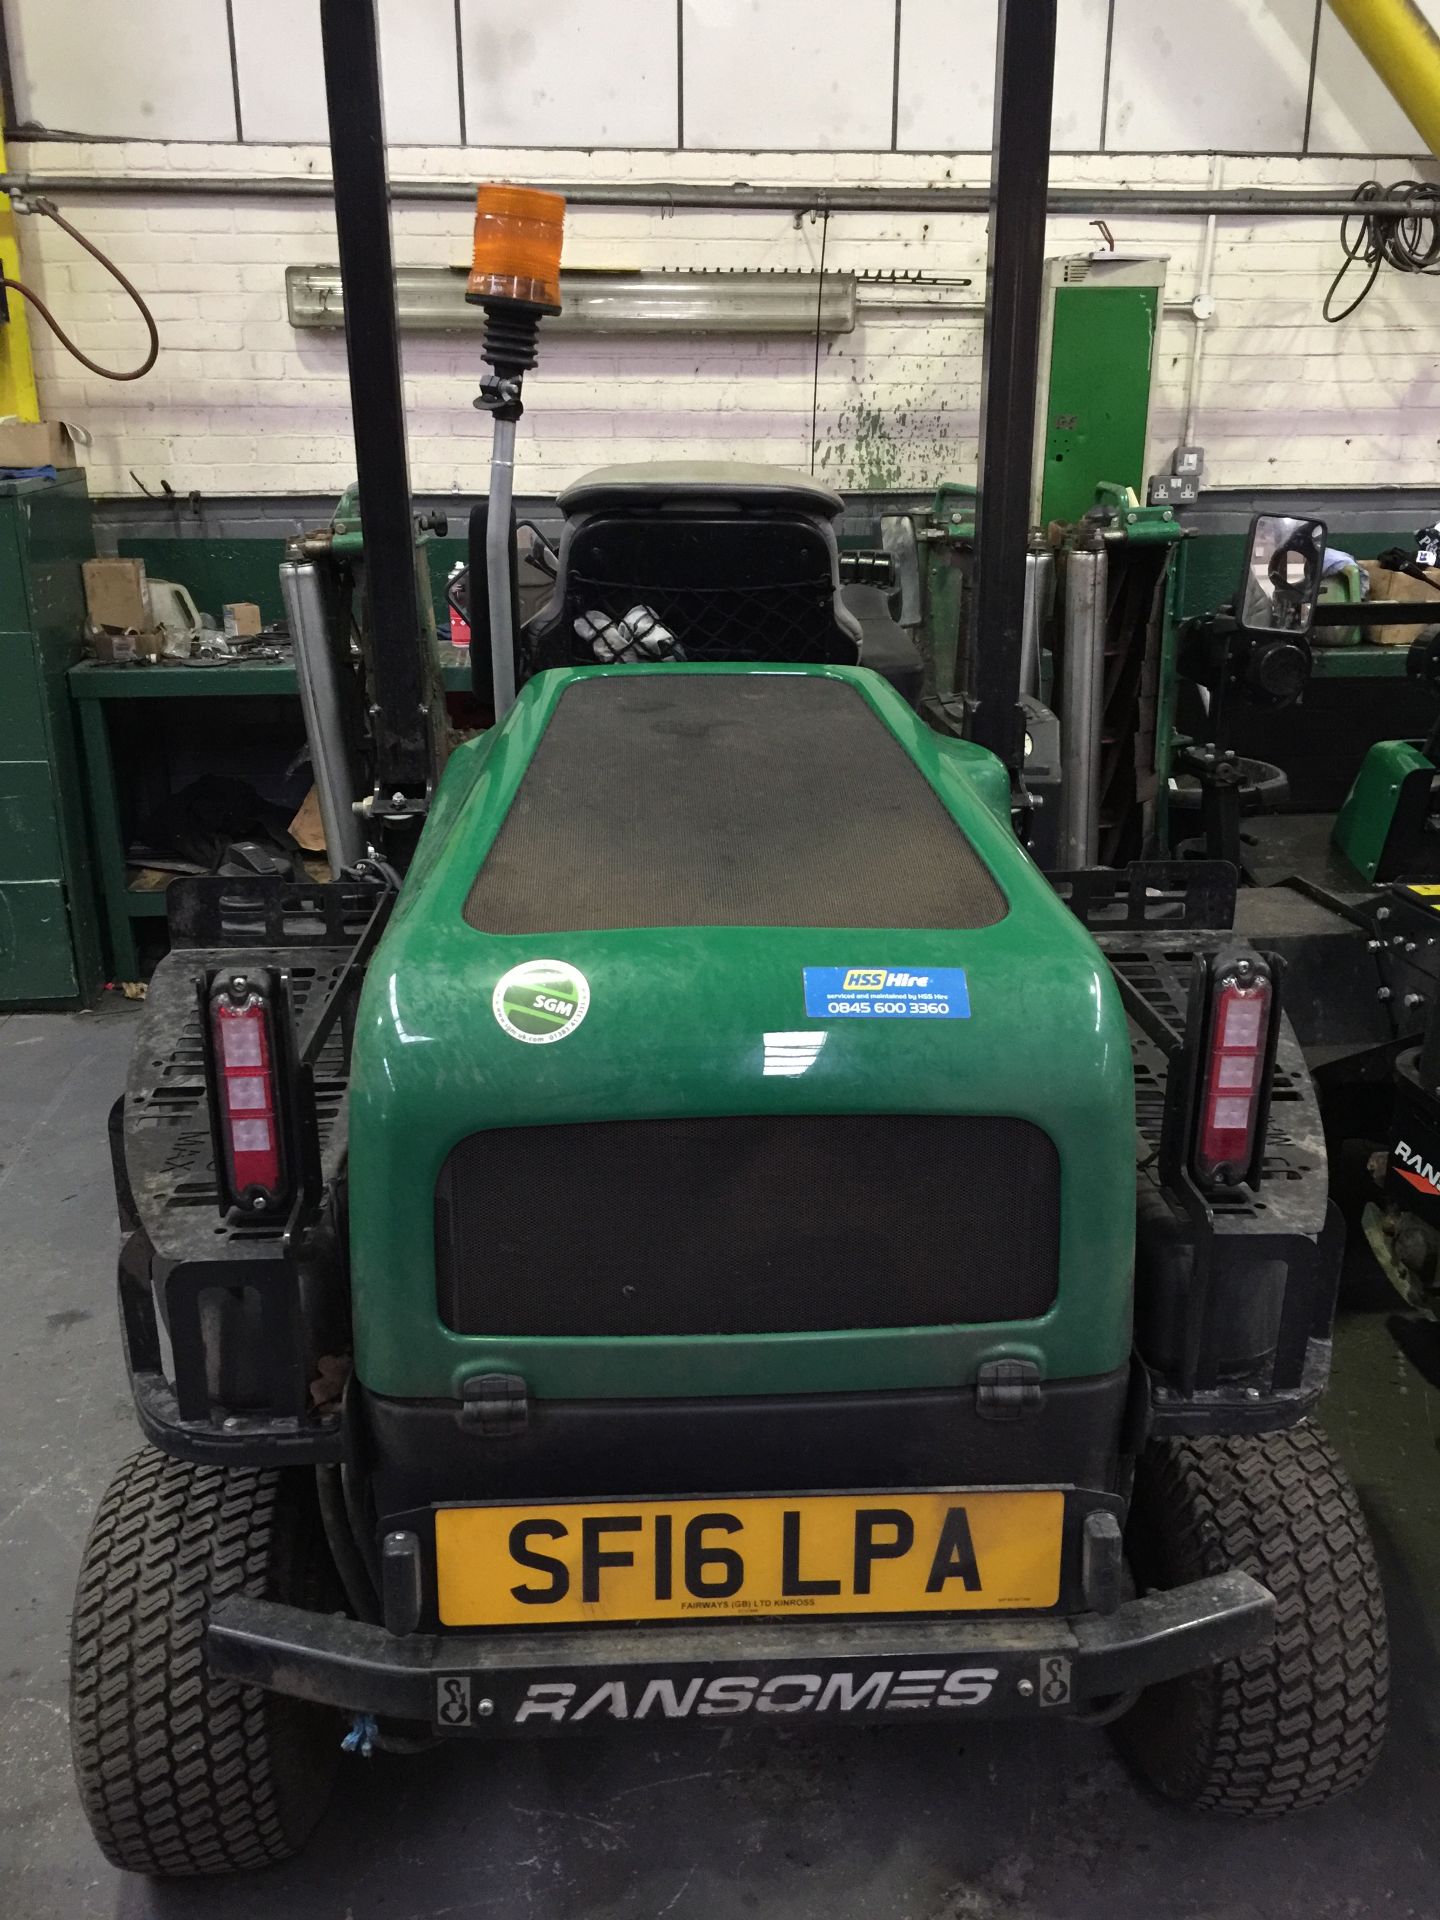 Ransomes Highway 3 LGEA340 4WD Ride on Mower - Image 3 of 6